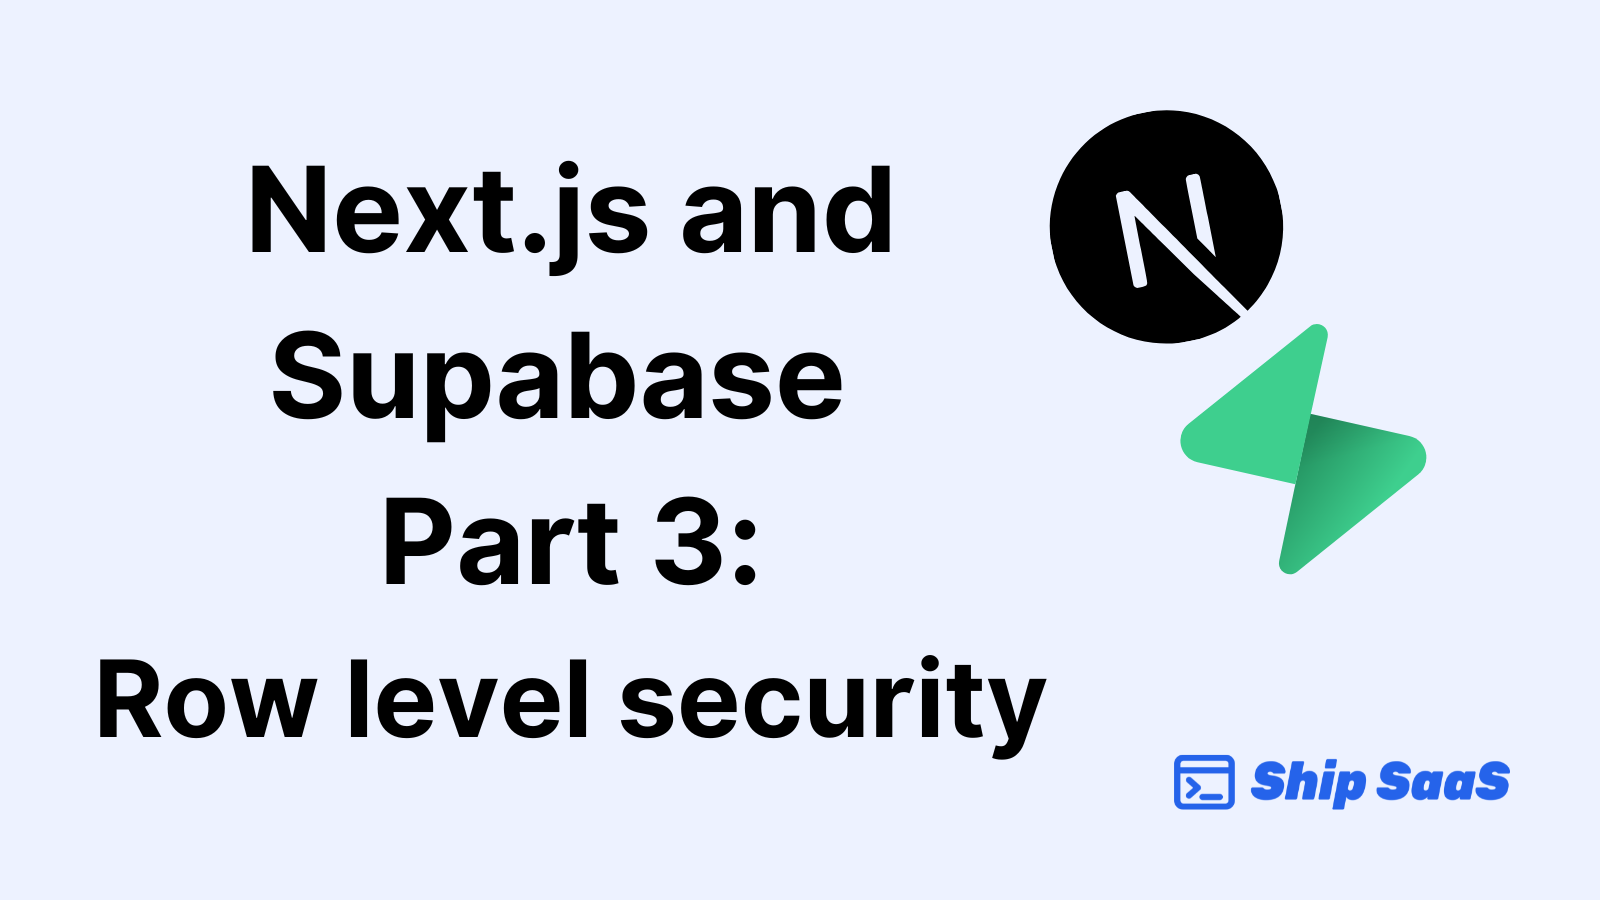 Get started with Next.js and Supabase - Part 3